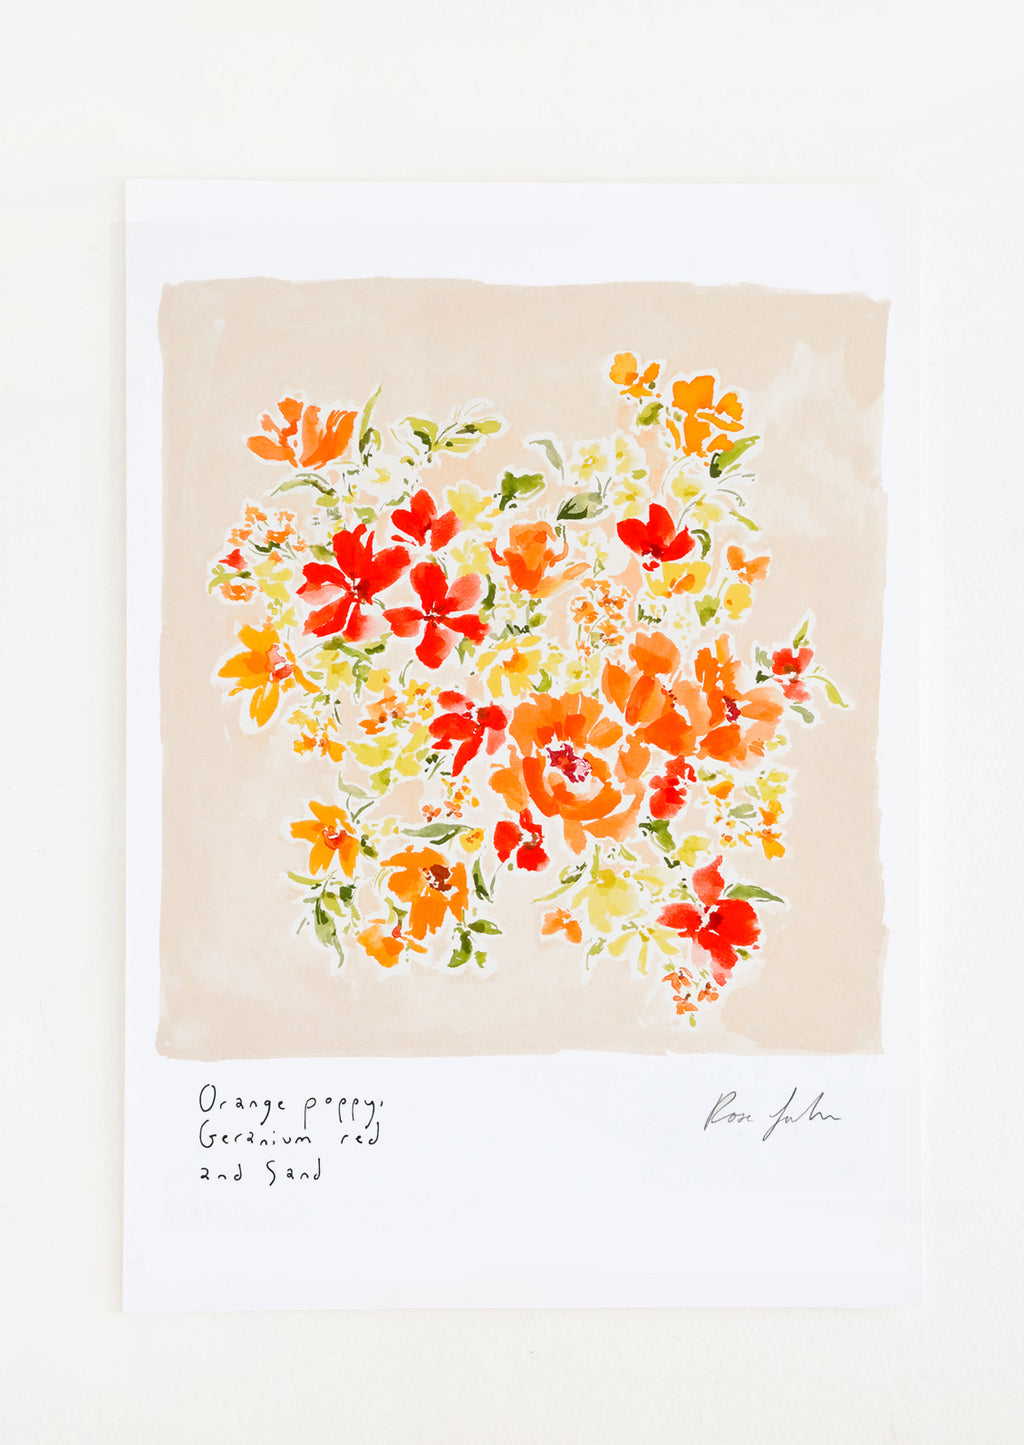 1: A floral art print with beige background and red, orange and yellow flowers.